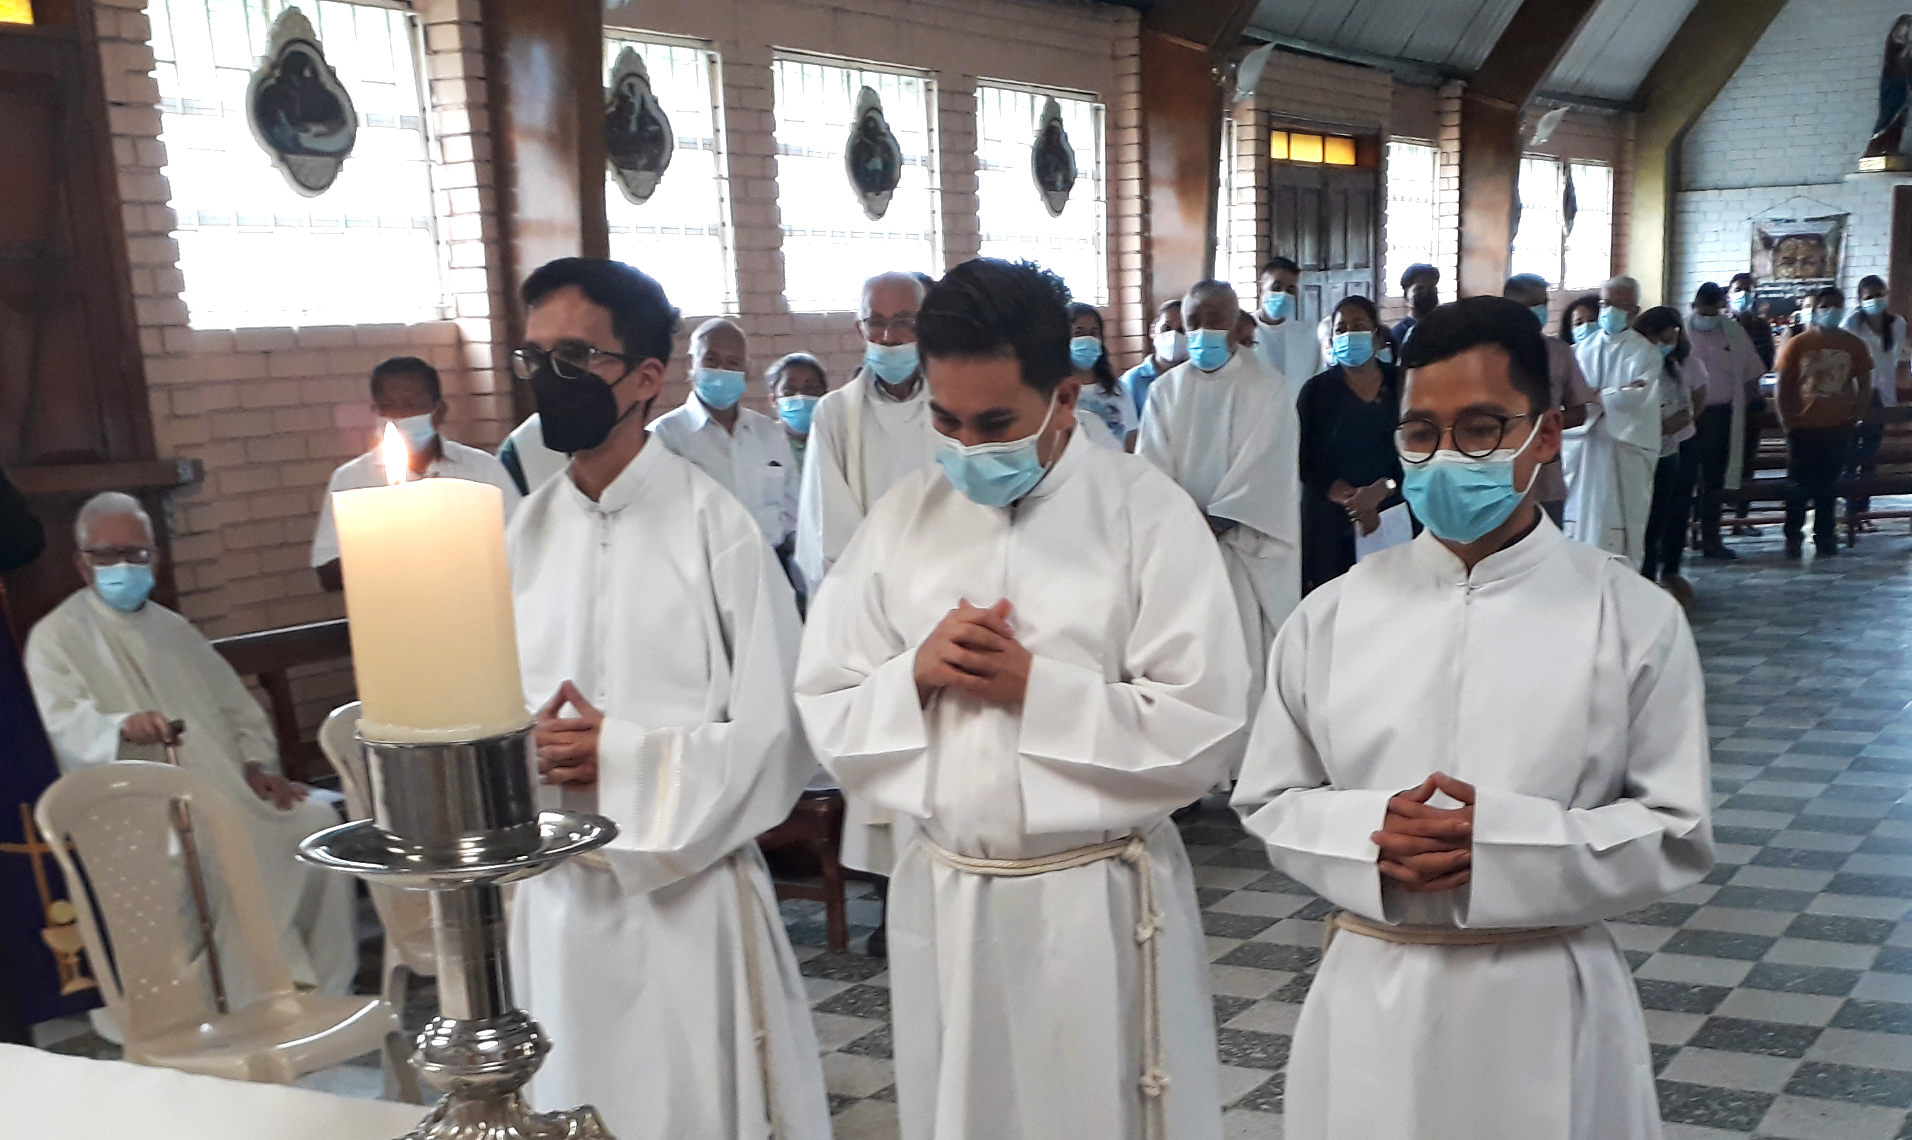 XVI PROVINCIAL CHAPTER AND PERPETUAL PROFESSION – PROVINCE OF EASTERN COLOMBIA AND ECUADOR